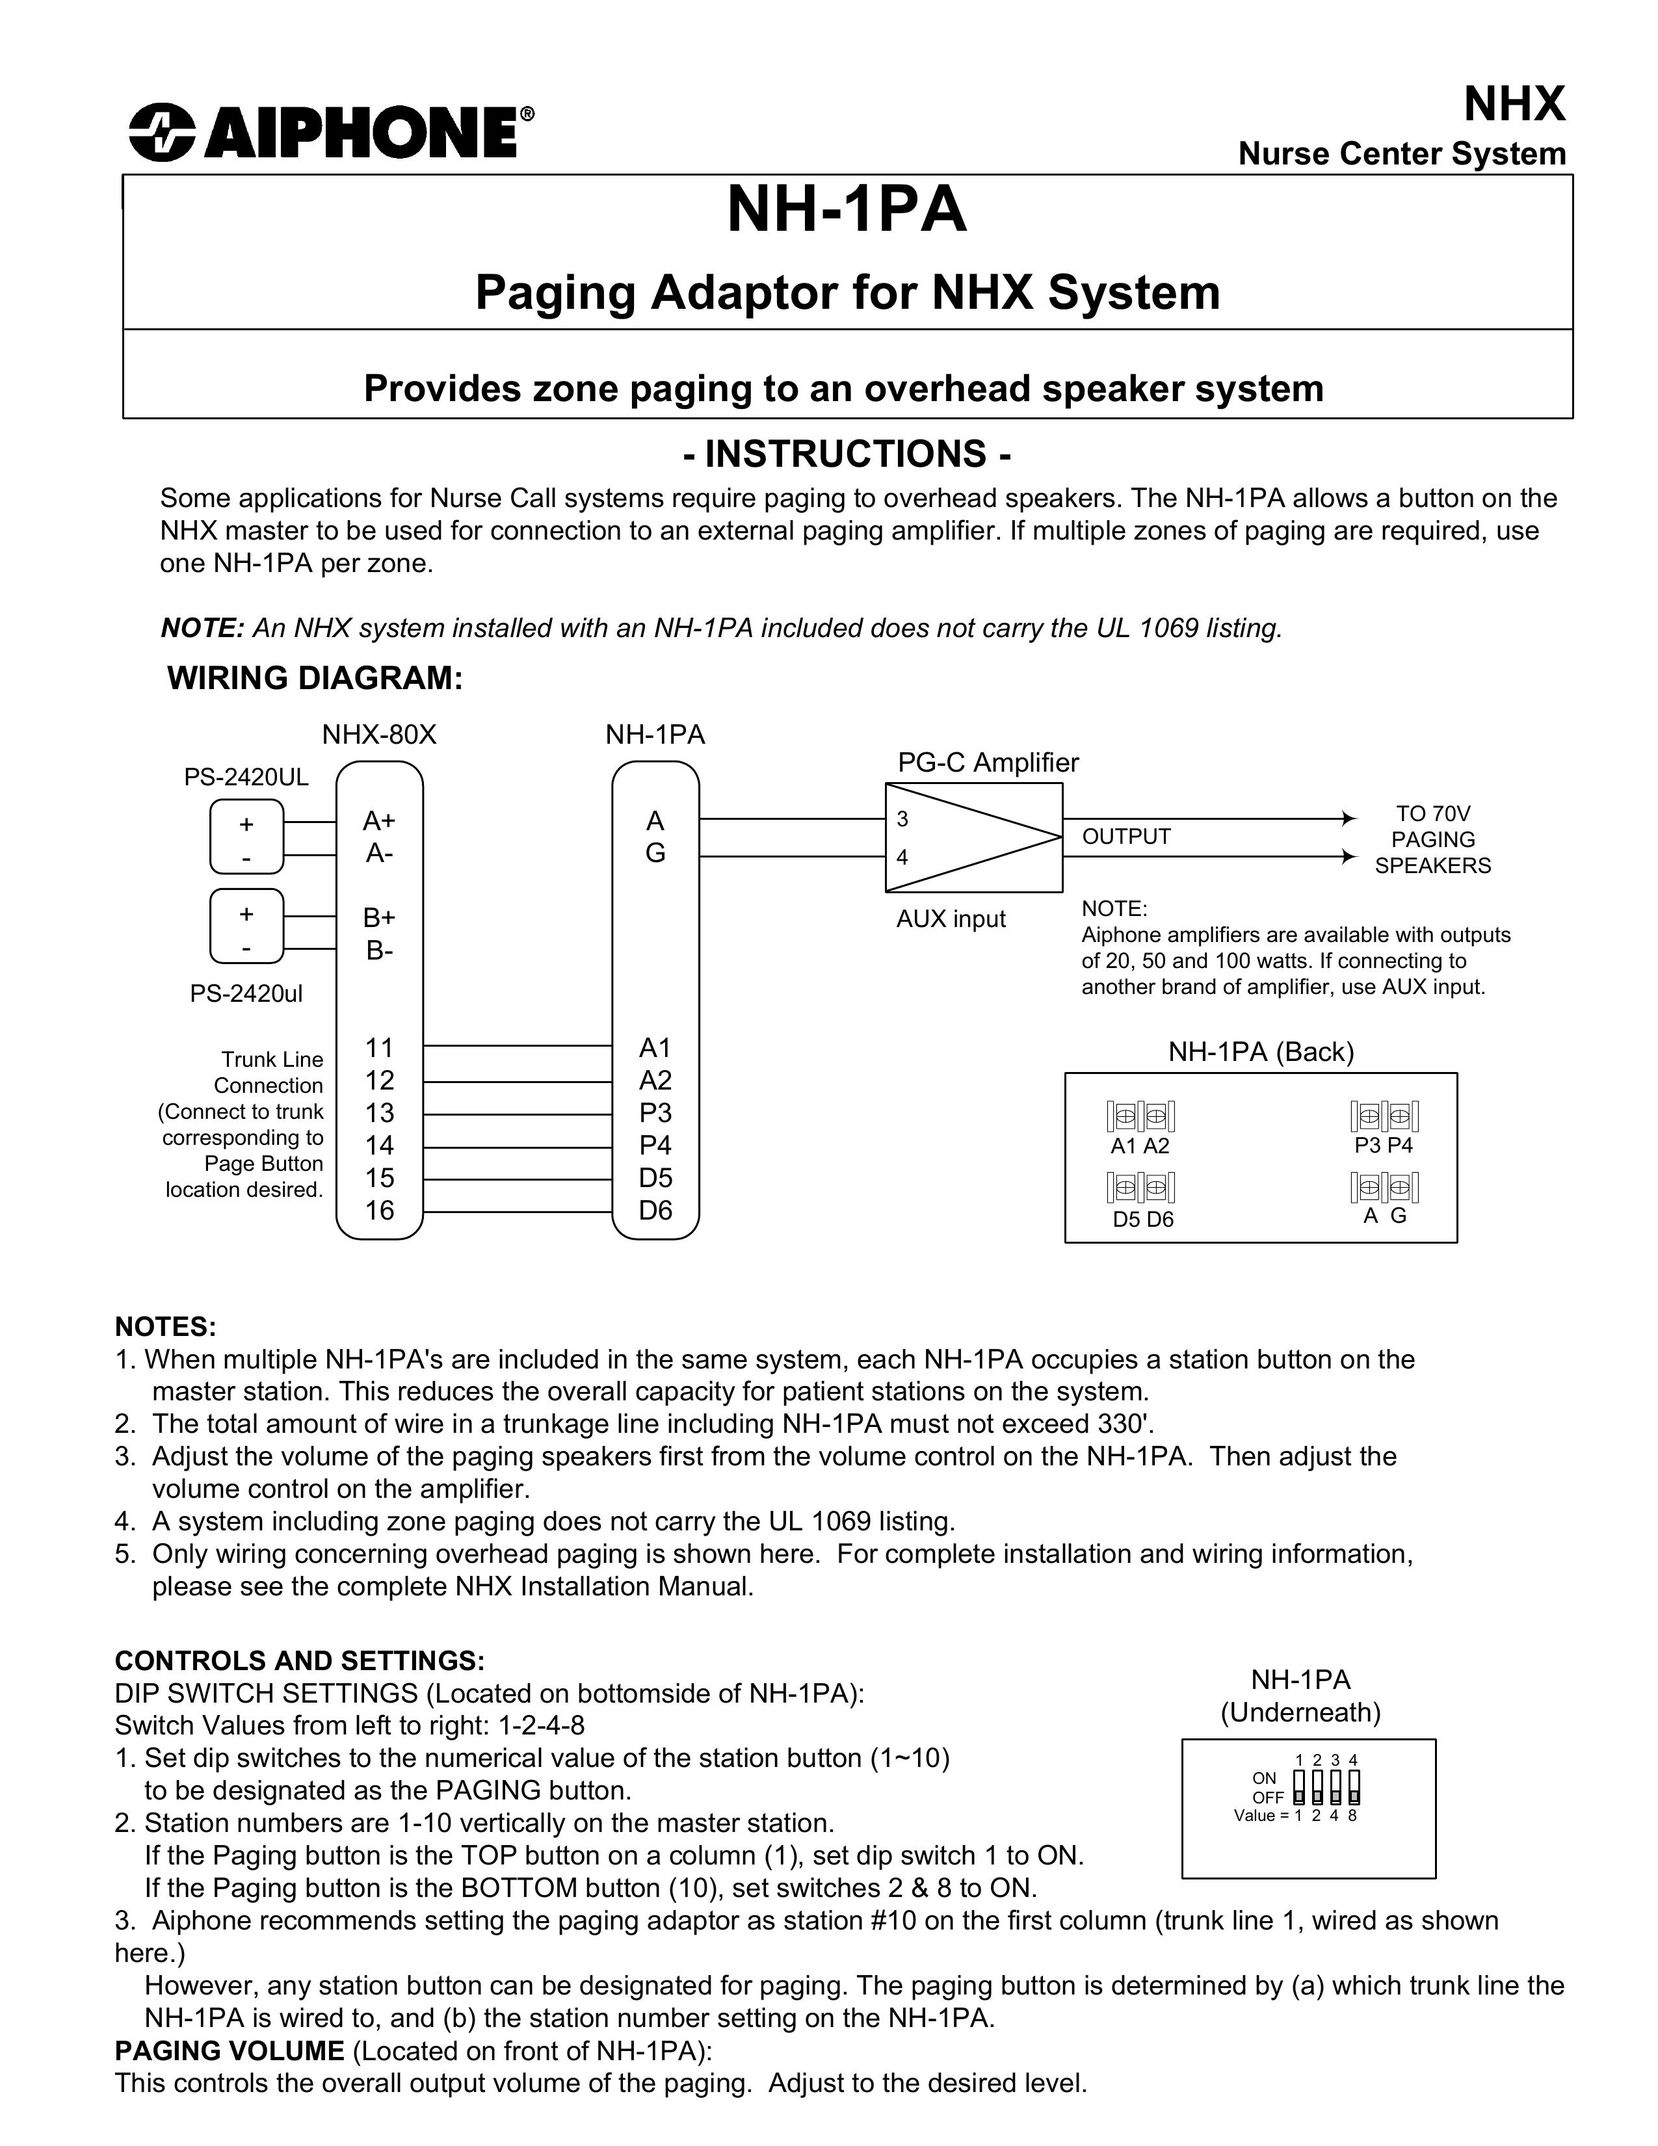 Aiphone NH-1PA Home Theater System User Manual